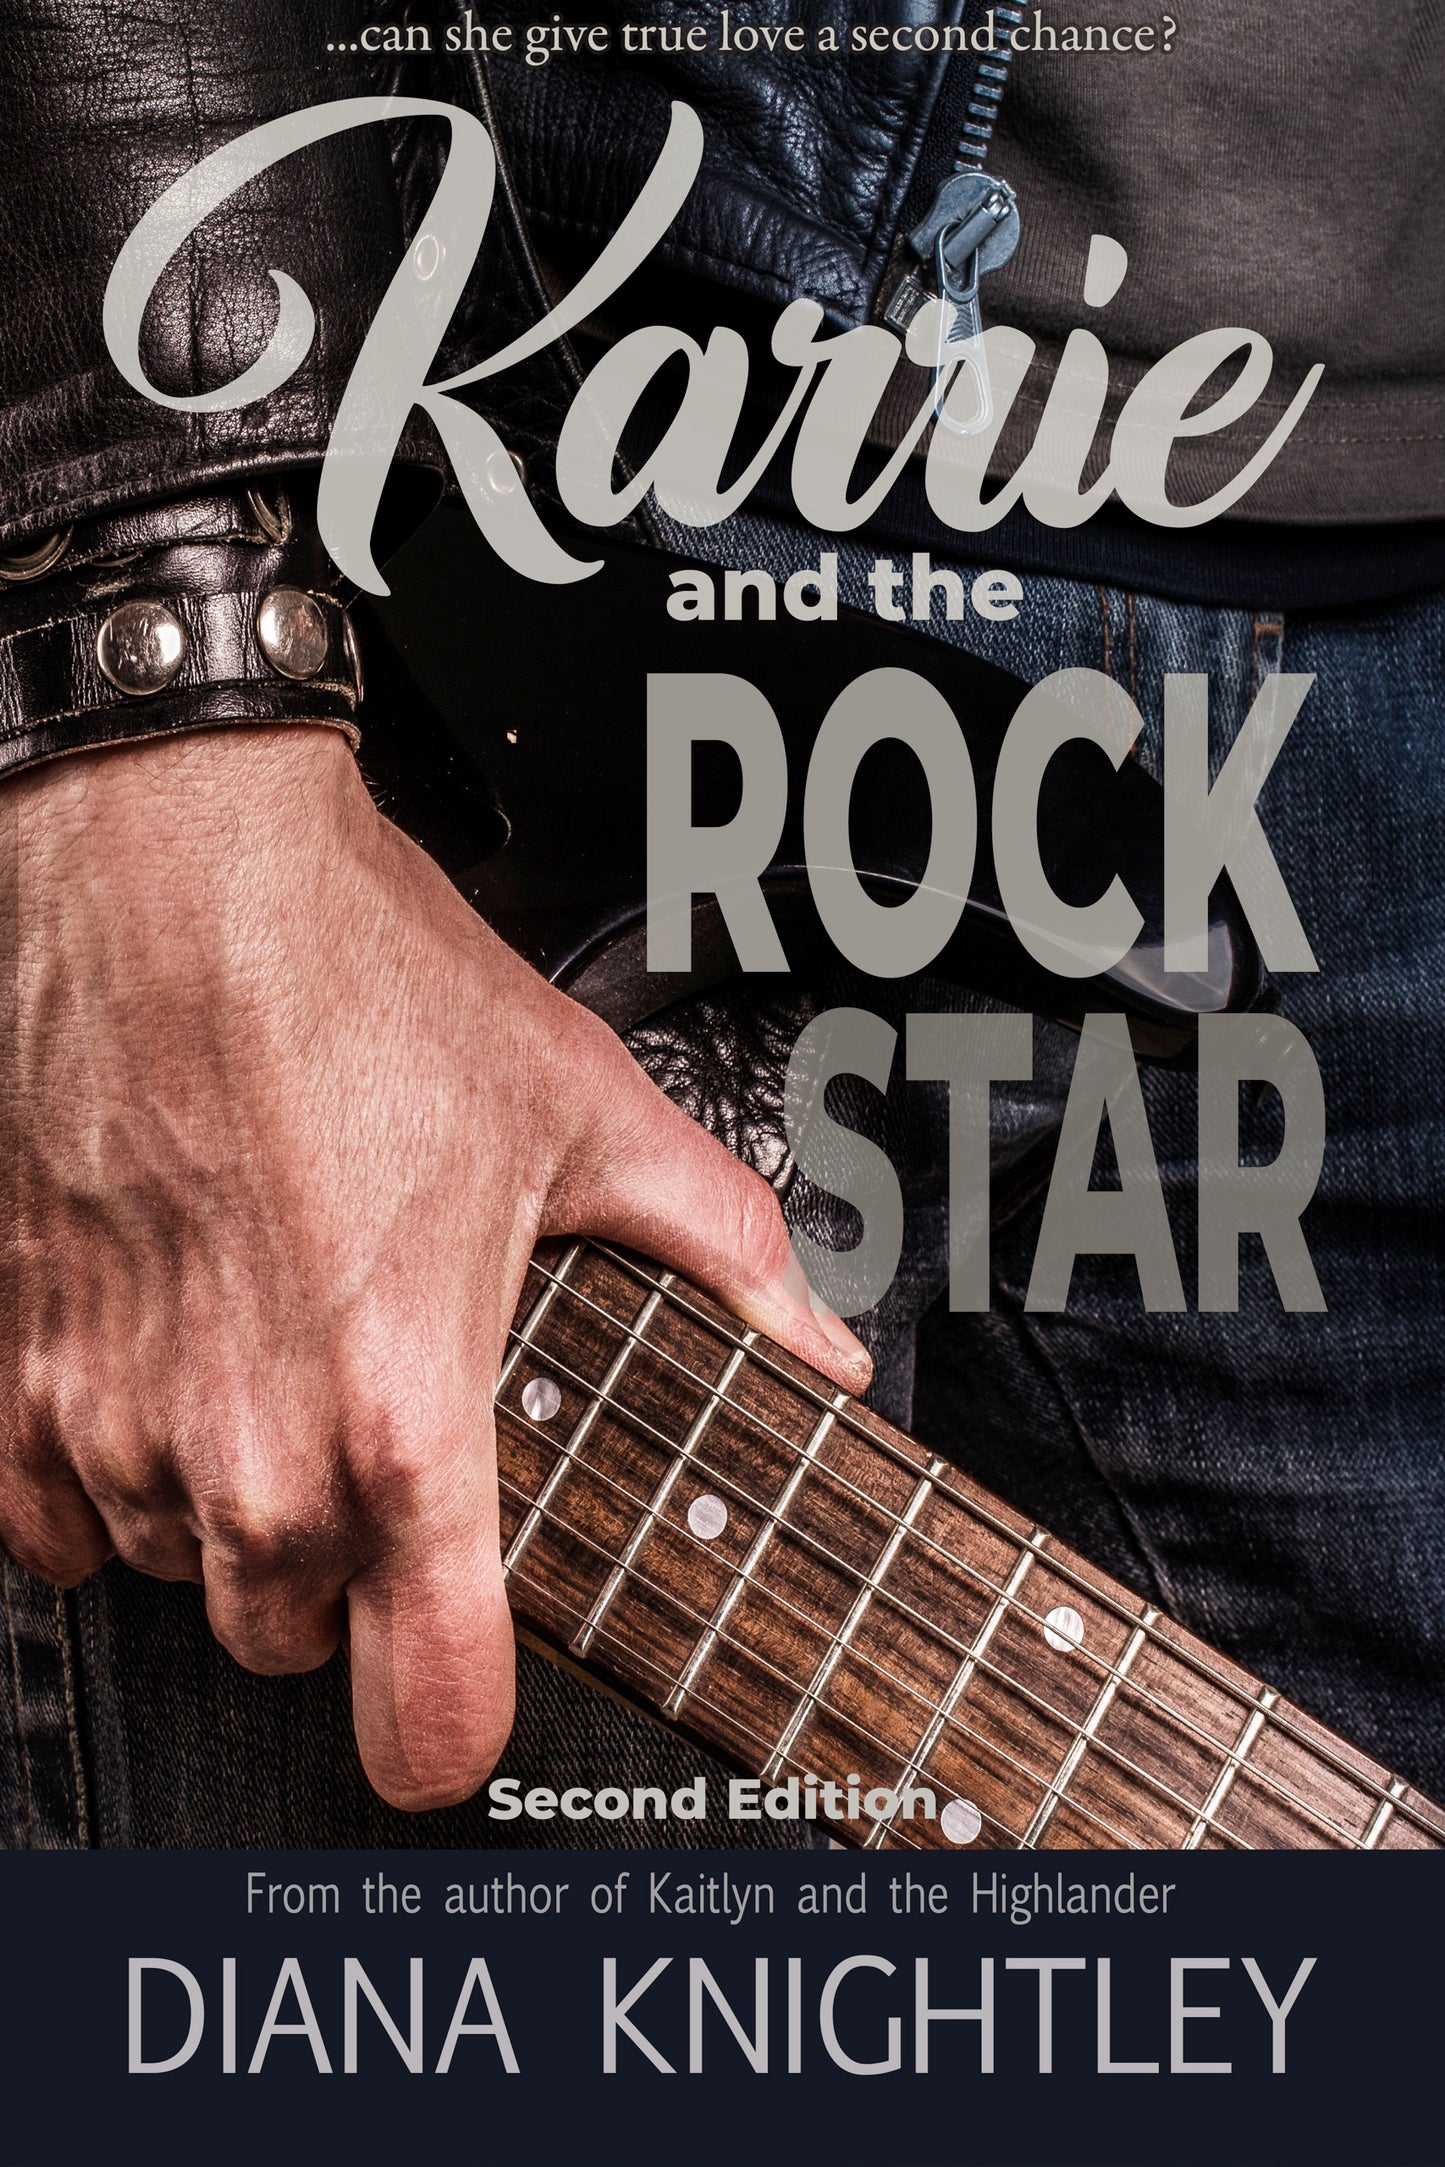 Karrie and the Rockstar